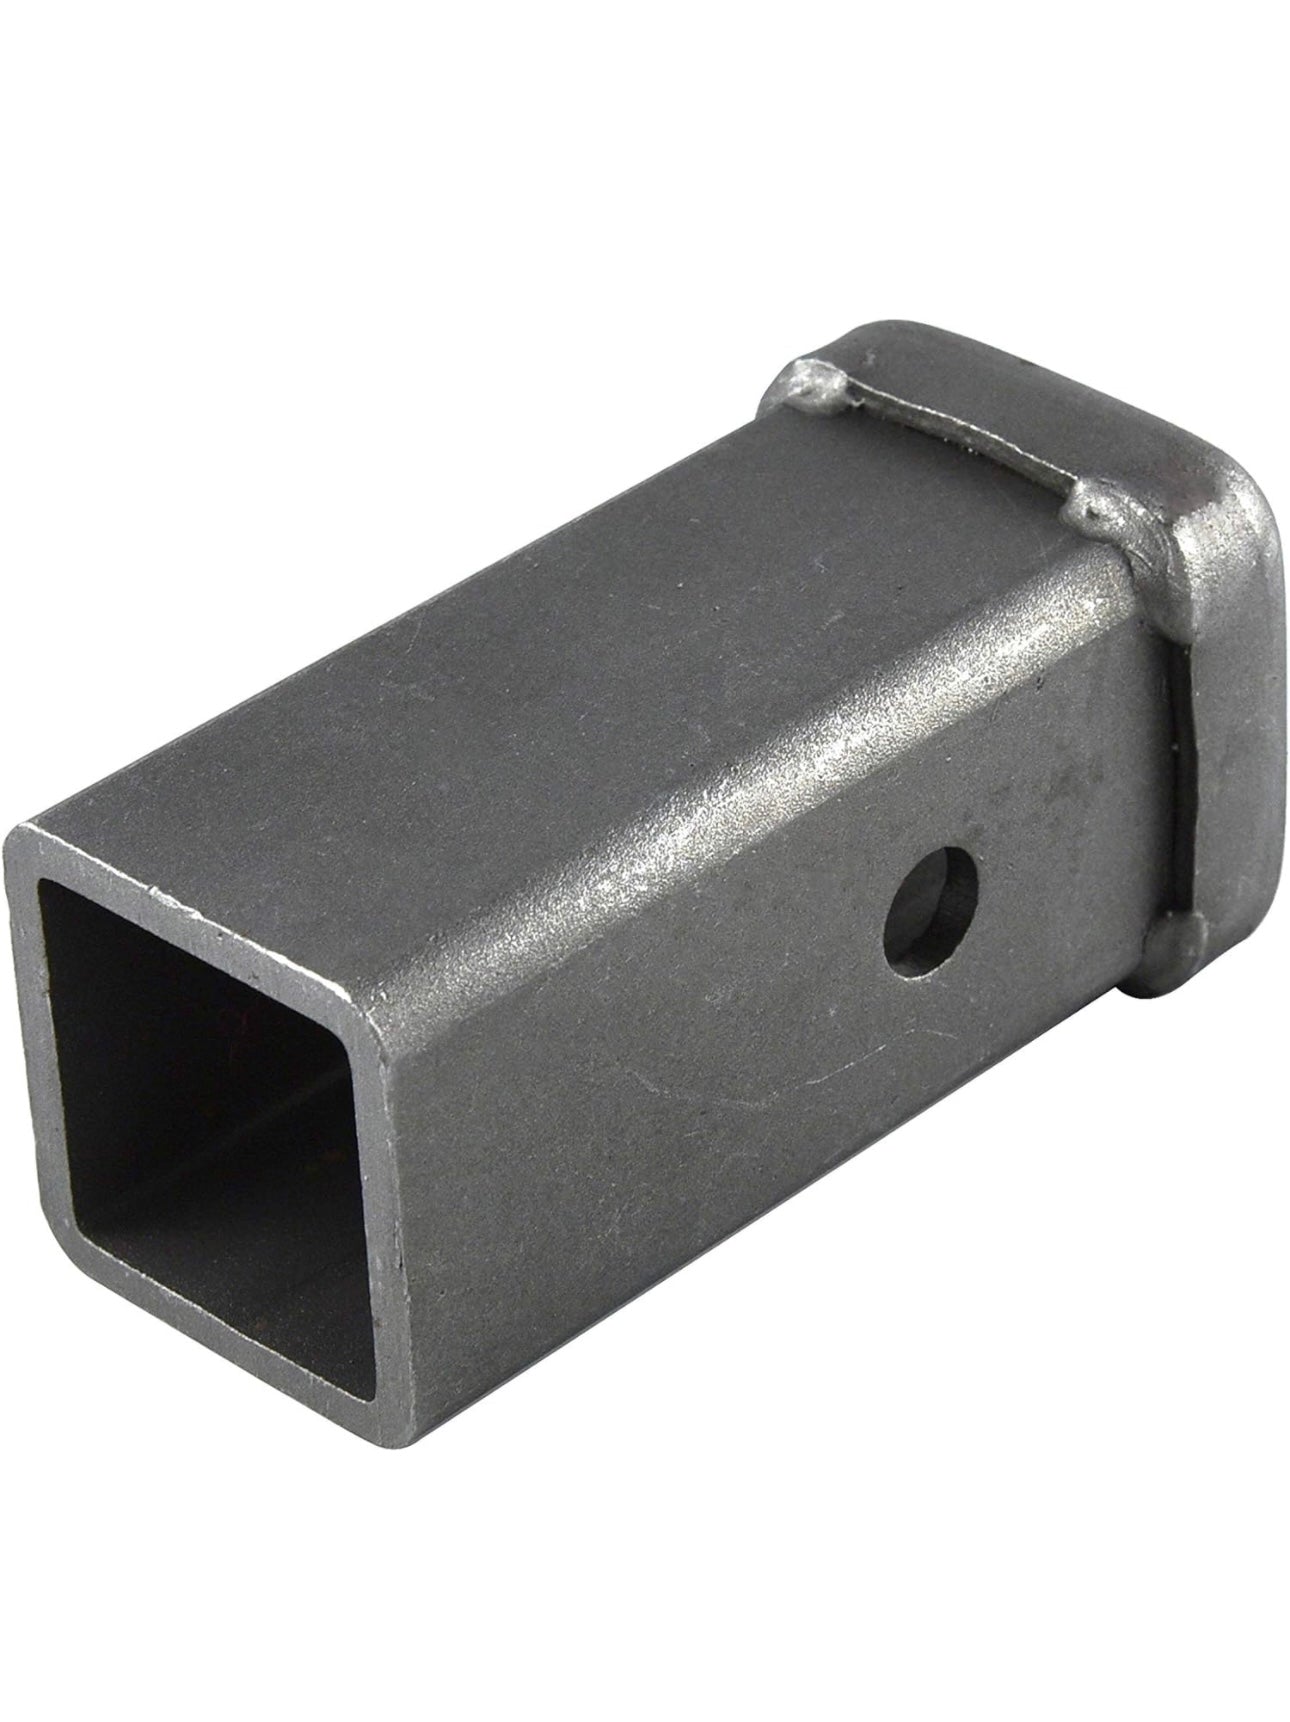 6” Hitch Receiver Tube Raw Trailer Hitch Receiver Tube 2-inch X 6-inch Length, Weld on Raw Steel